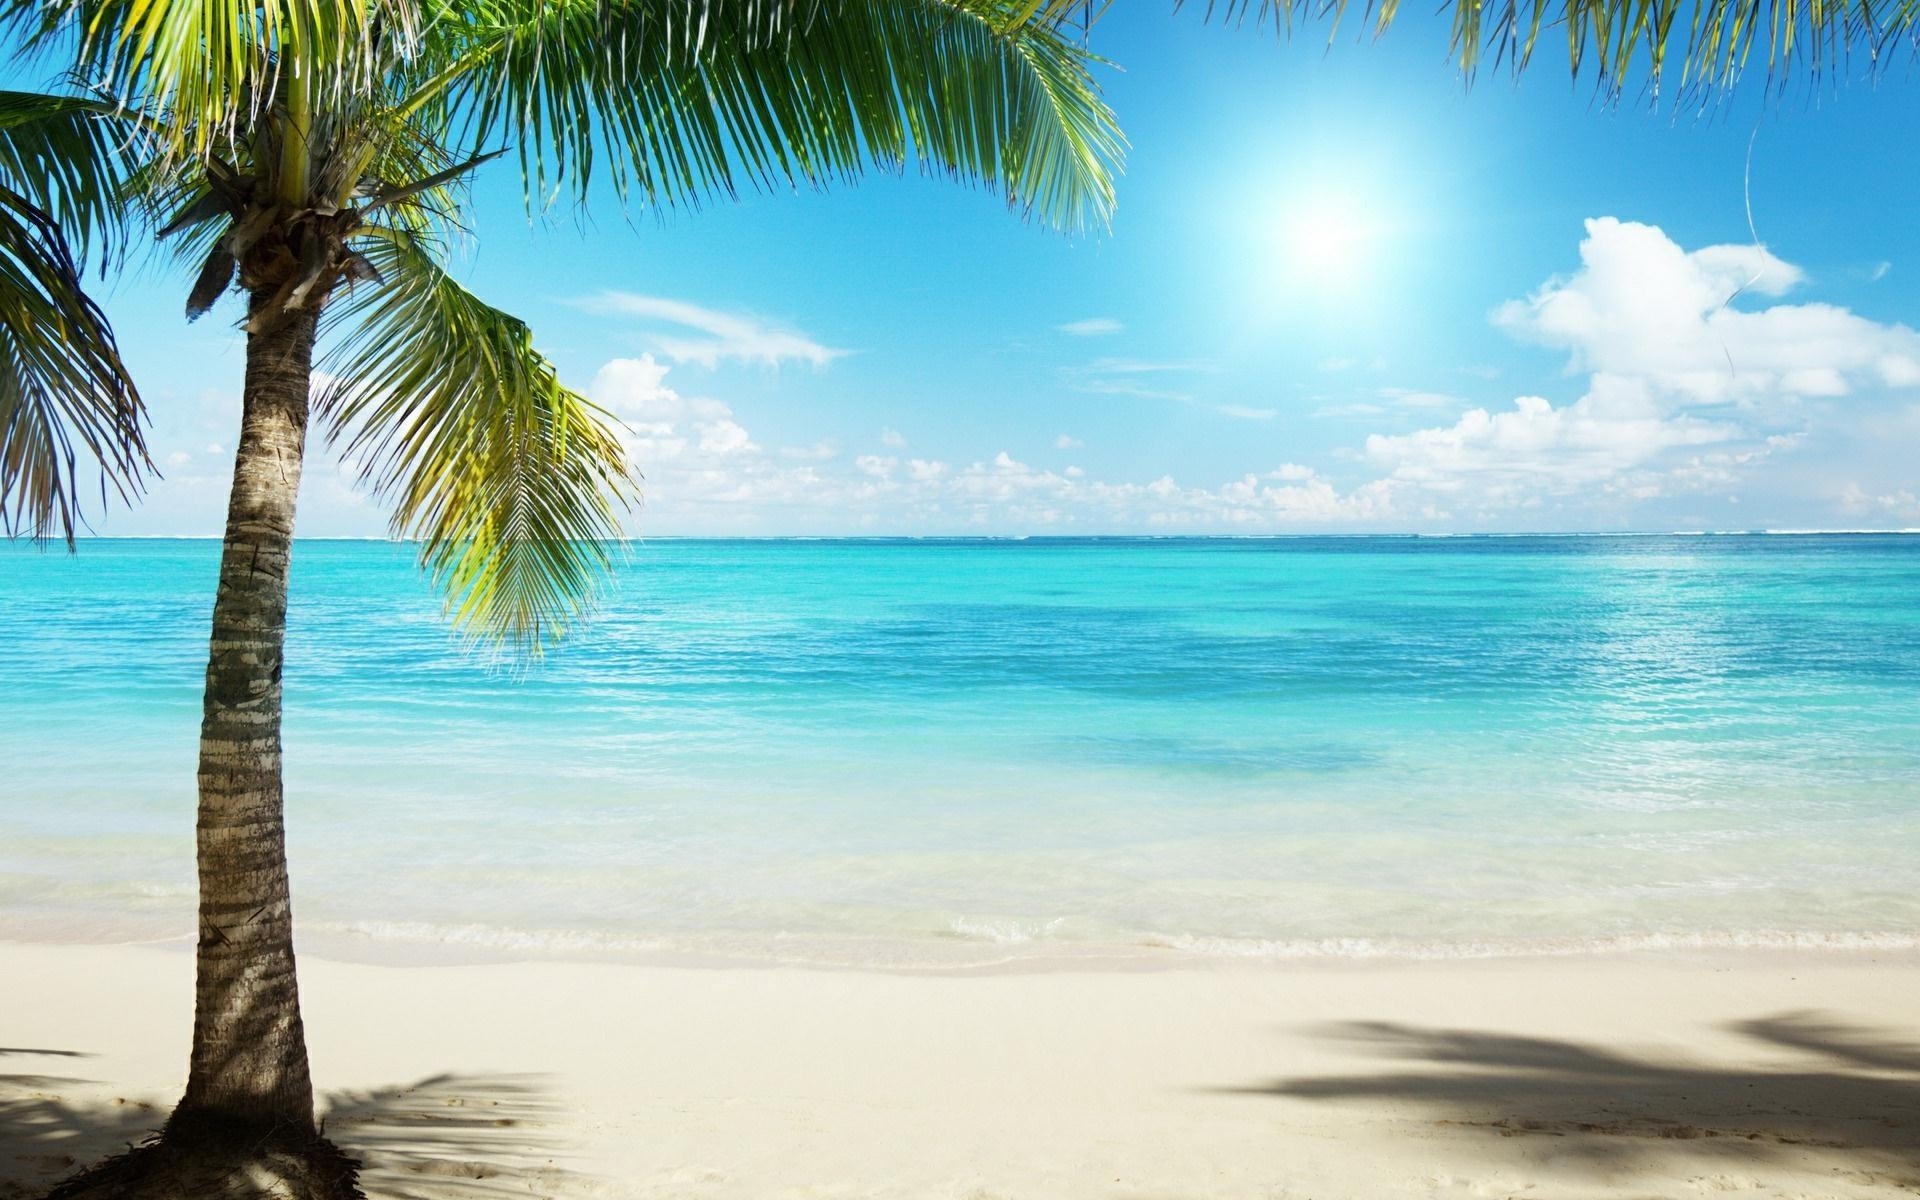 Beach Background Hd Top Sellers, SAVE 55%.